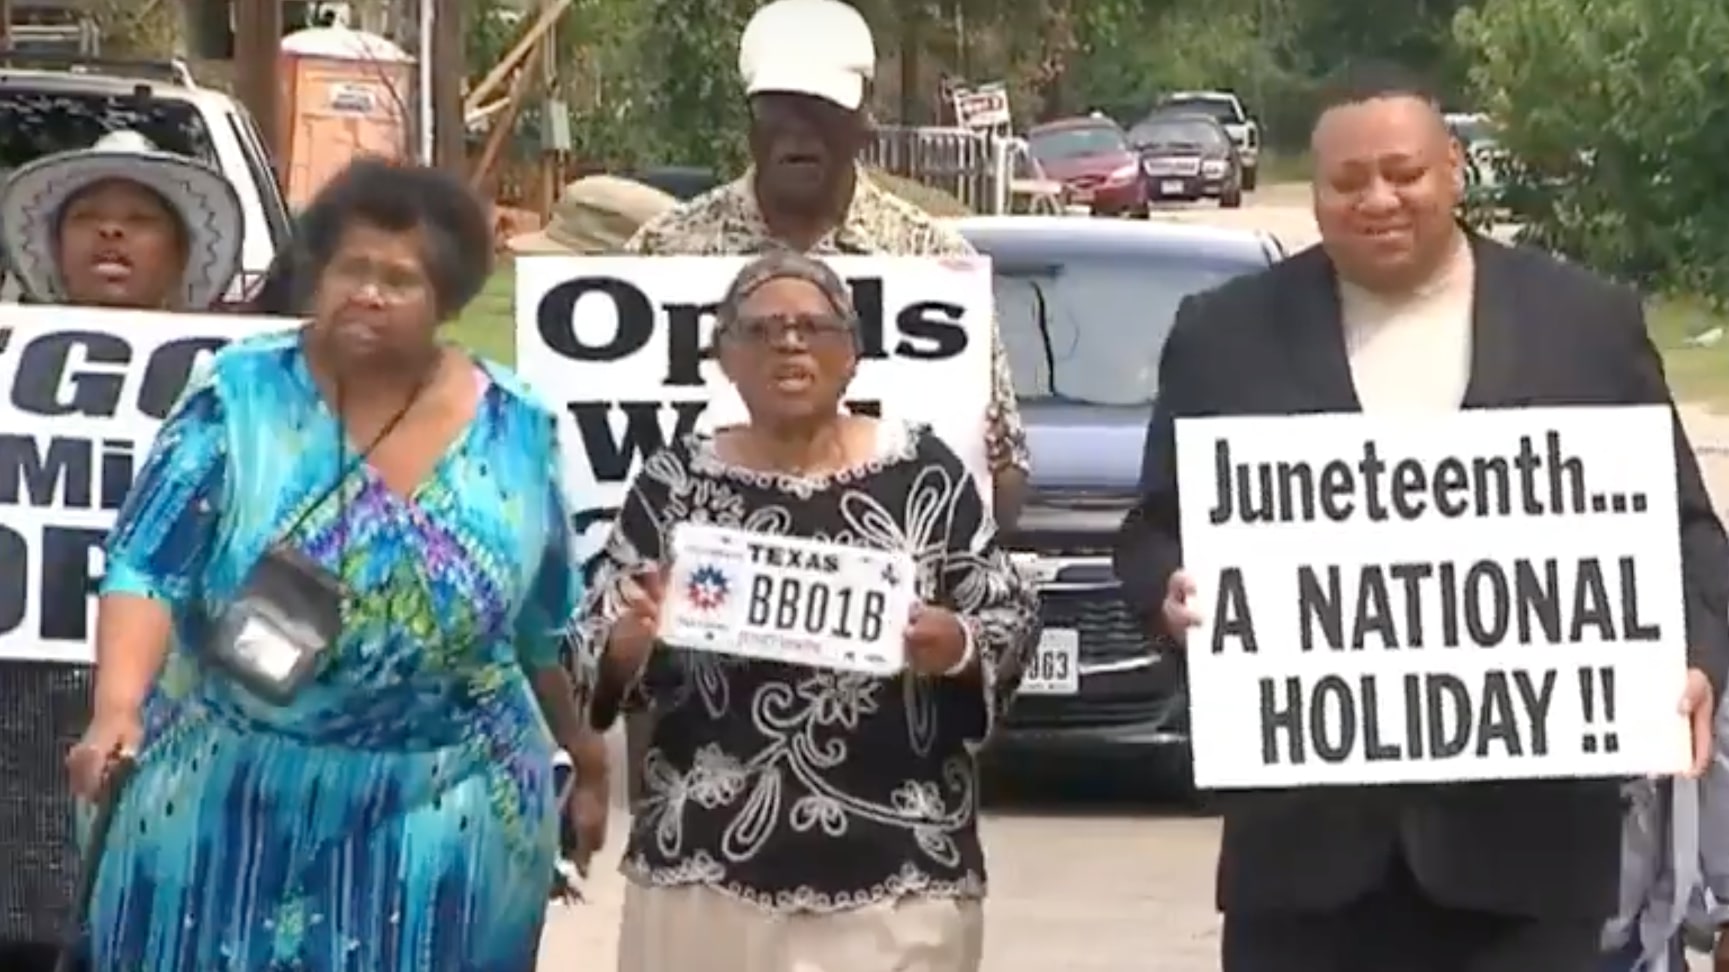 This 92-Year-Old Is Marching Throughout The States To Make Juneteenth A National Holiday